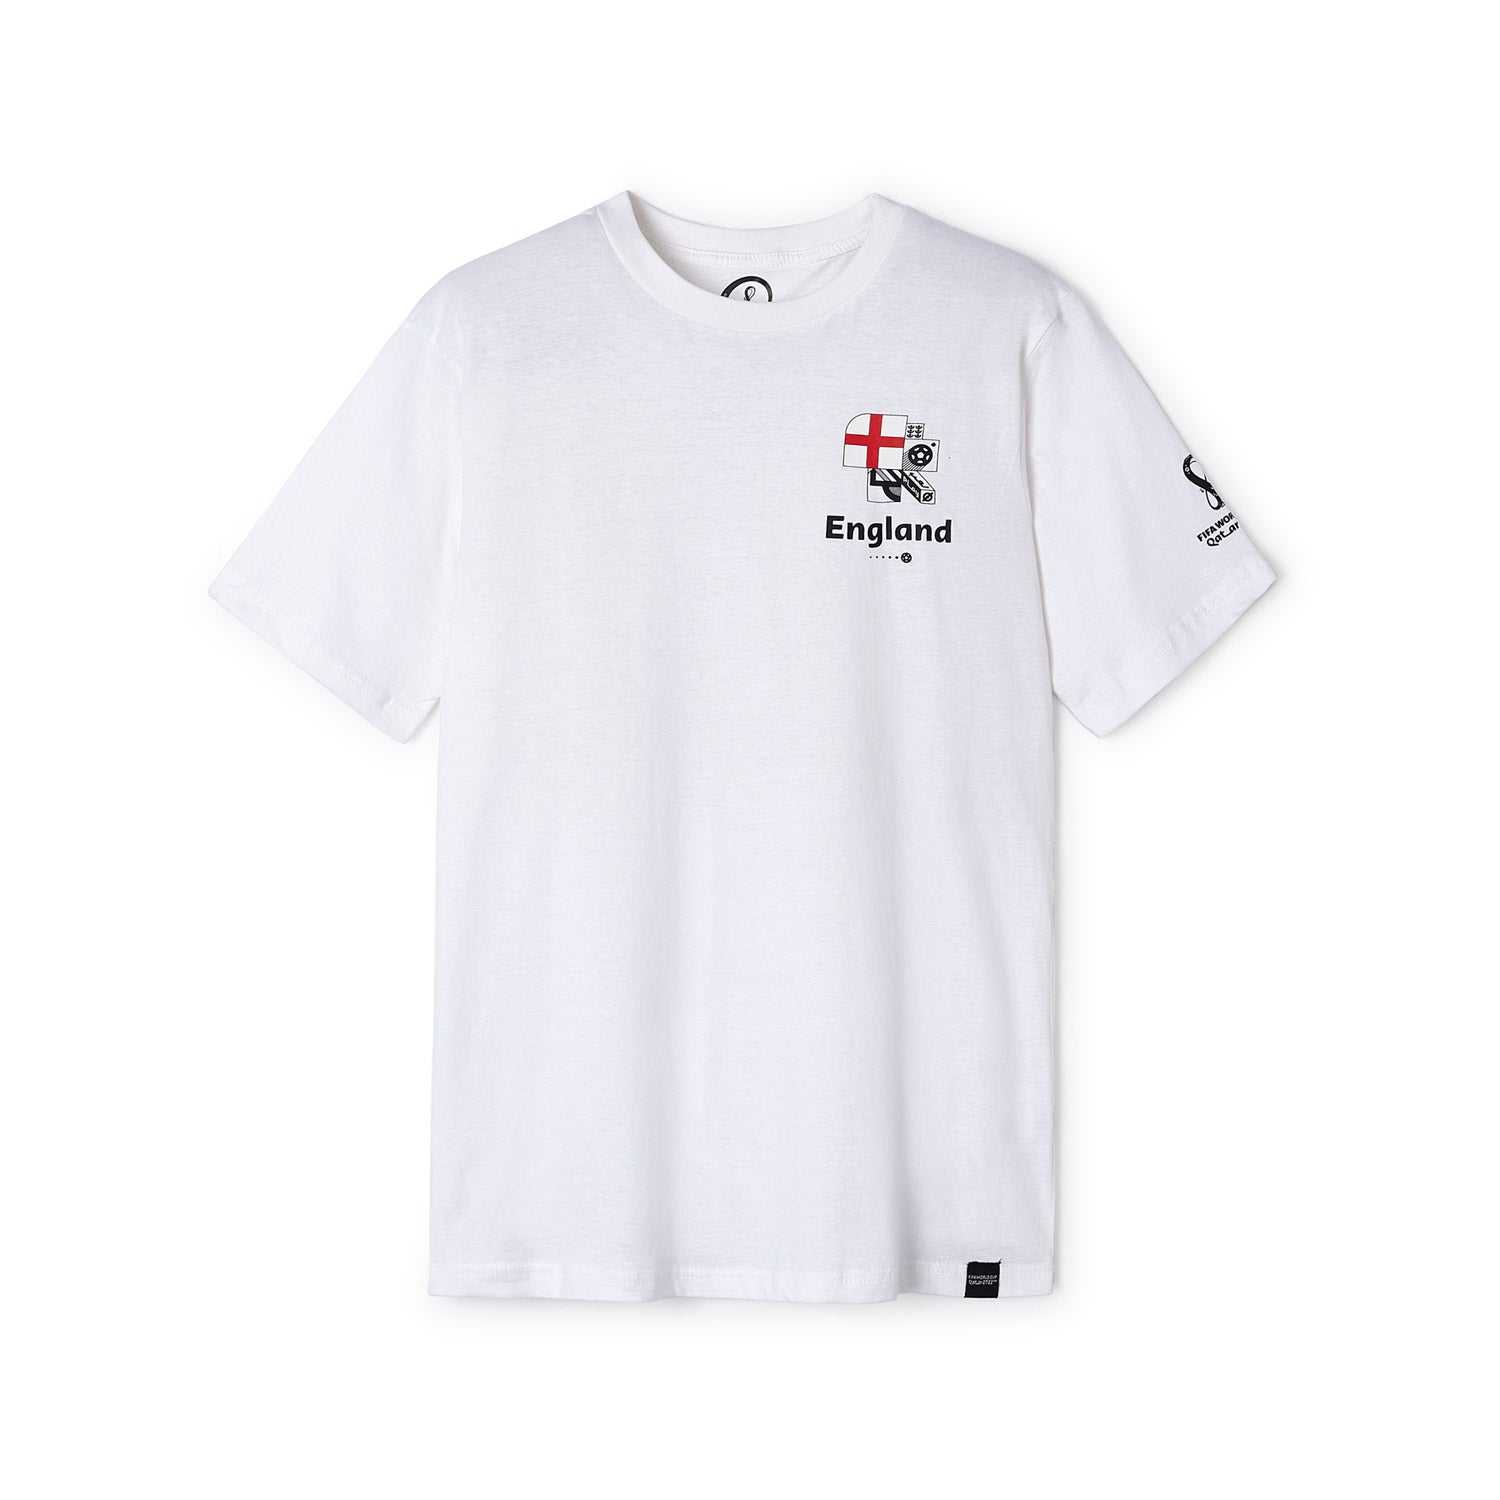 2022 World Cup England White T-Shirt - Mens